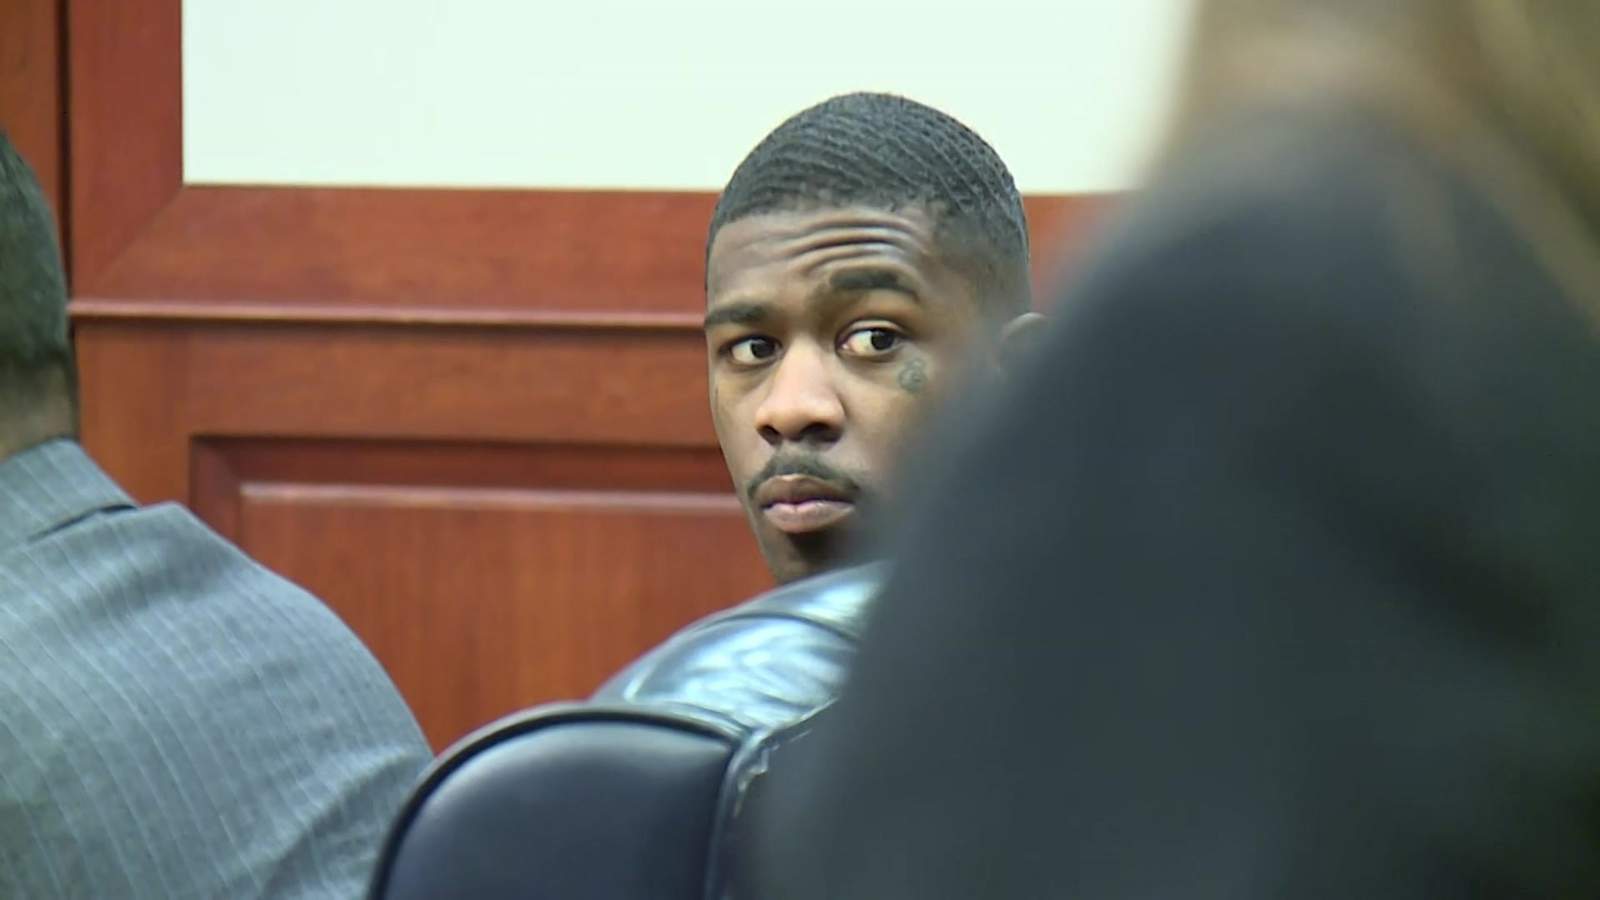 Jacobe Payton sentenced to 78 years in prison for killing 8-year-old De’Maree Adkins in 2017, DA says